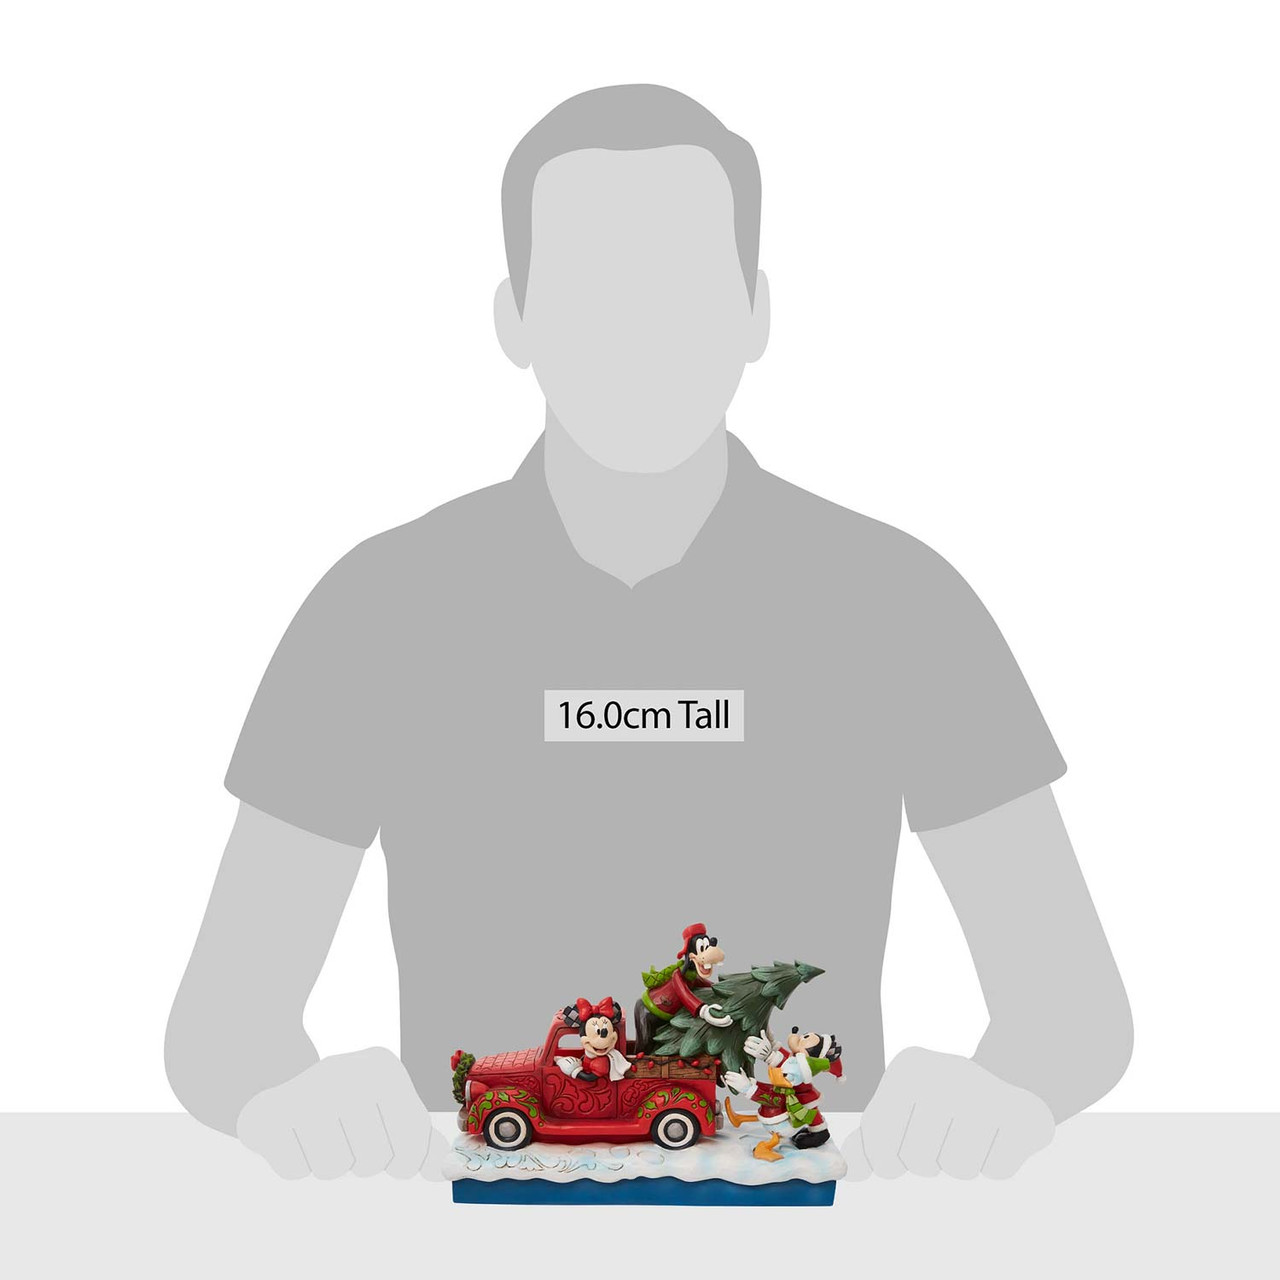 https://cdn11.bigcommerce.com/s-vmynke4q1q/images/stencil/1280x1280/products/4266/9196/6010868-Disney-Traditions-Red-Truck-Mickey-Friends-Christmas-Figurine-Jim-Shore-Size__04901.1667139990.jpg?c=1?imbypass=on